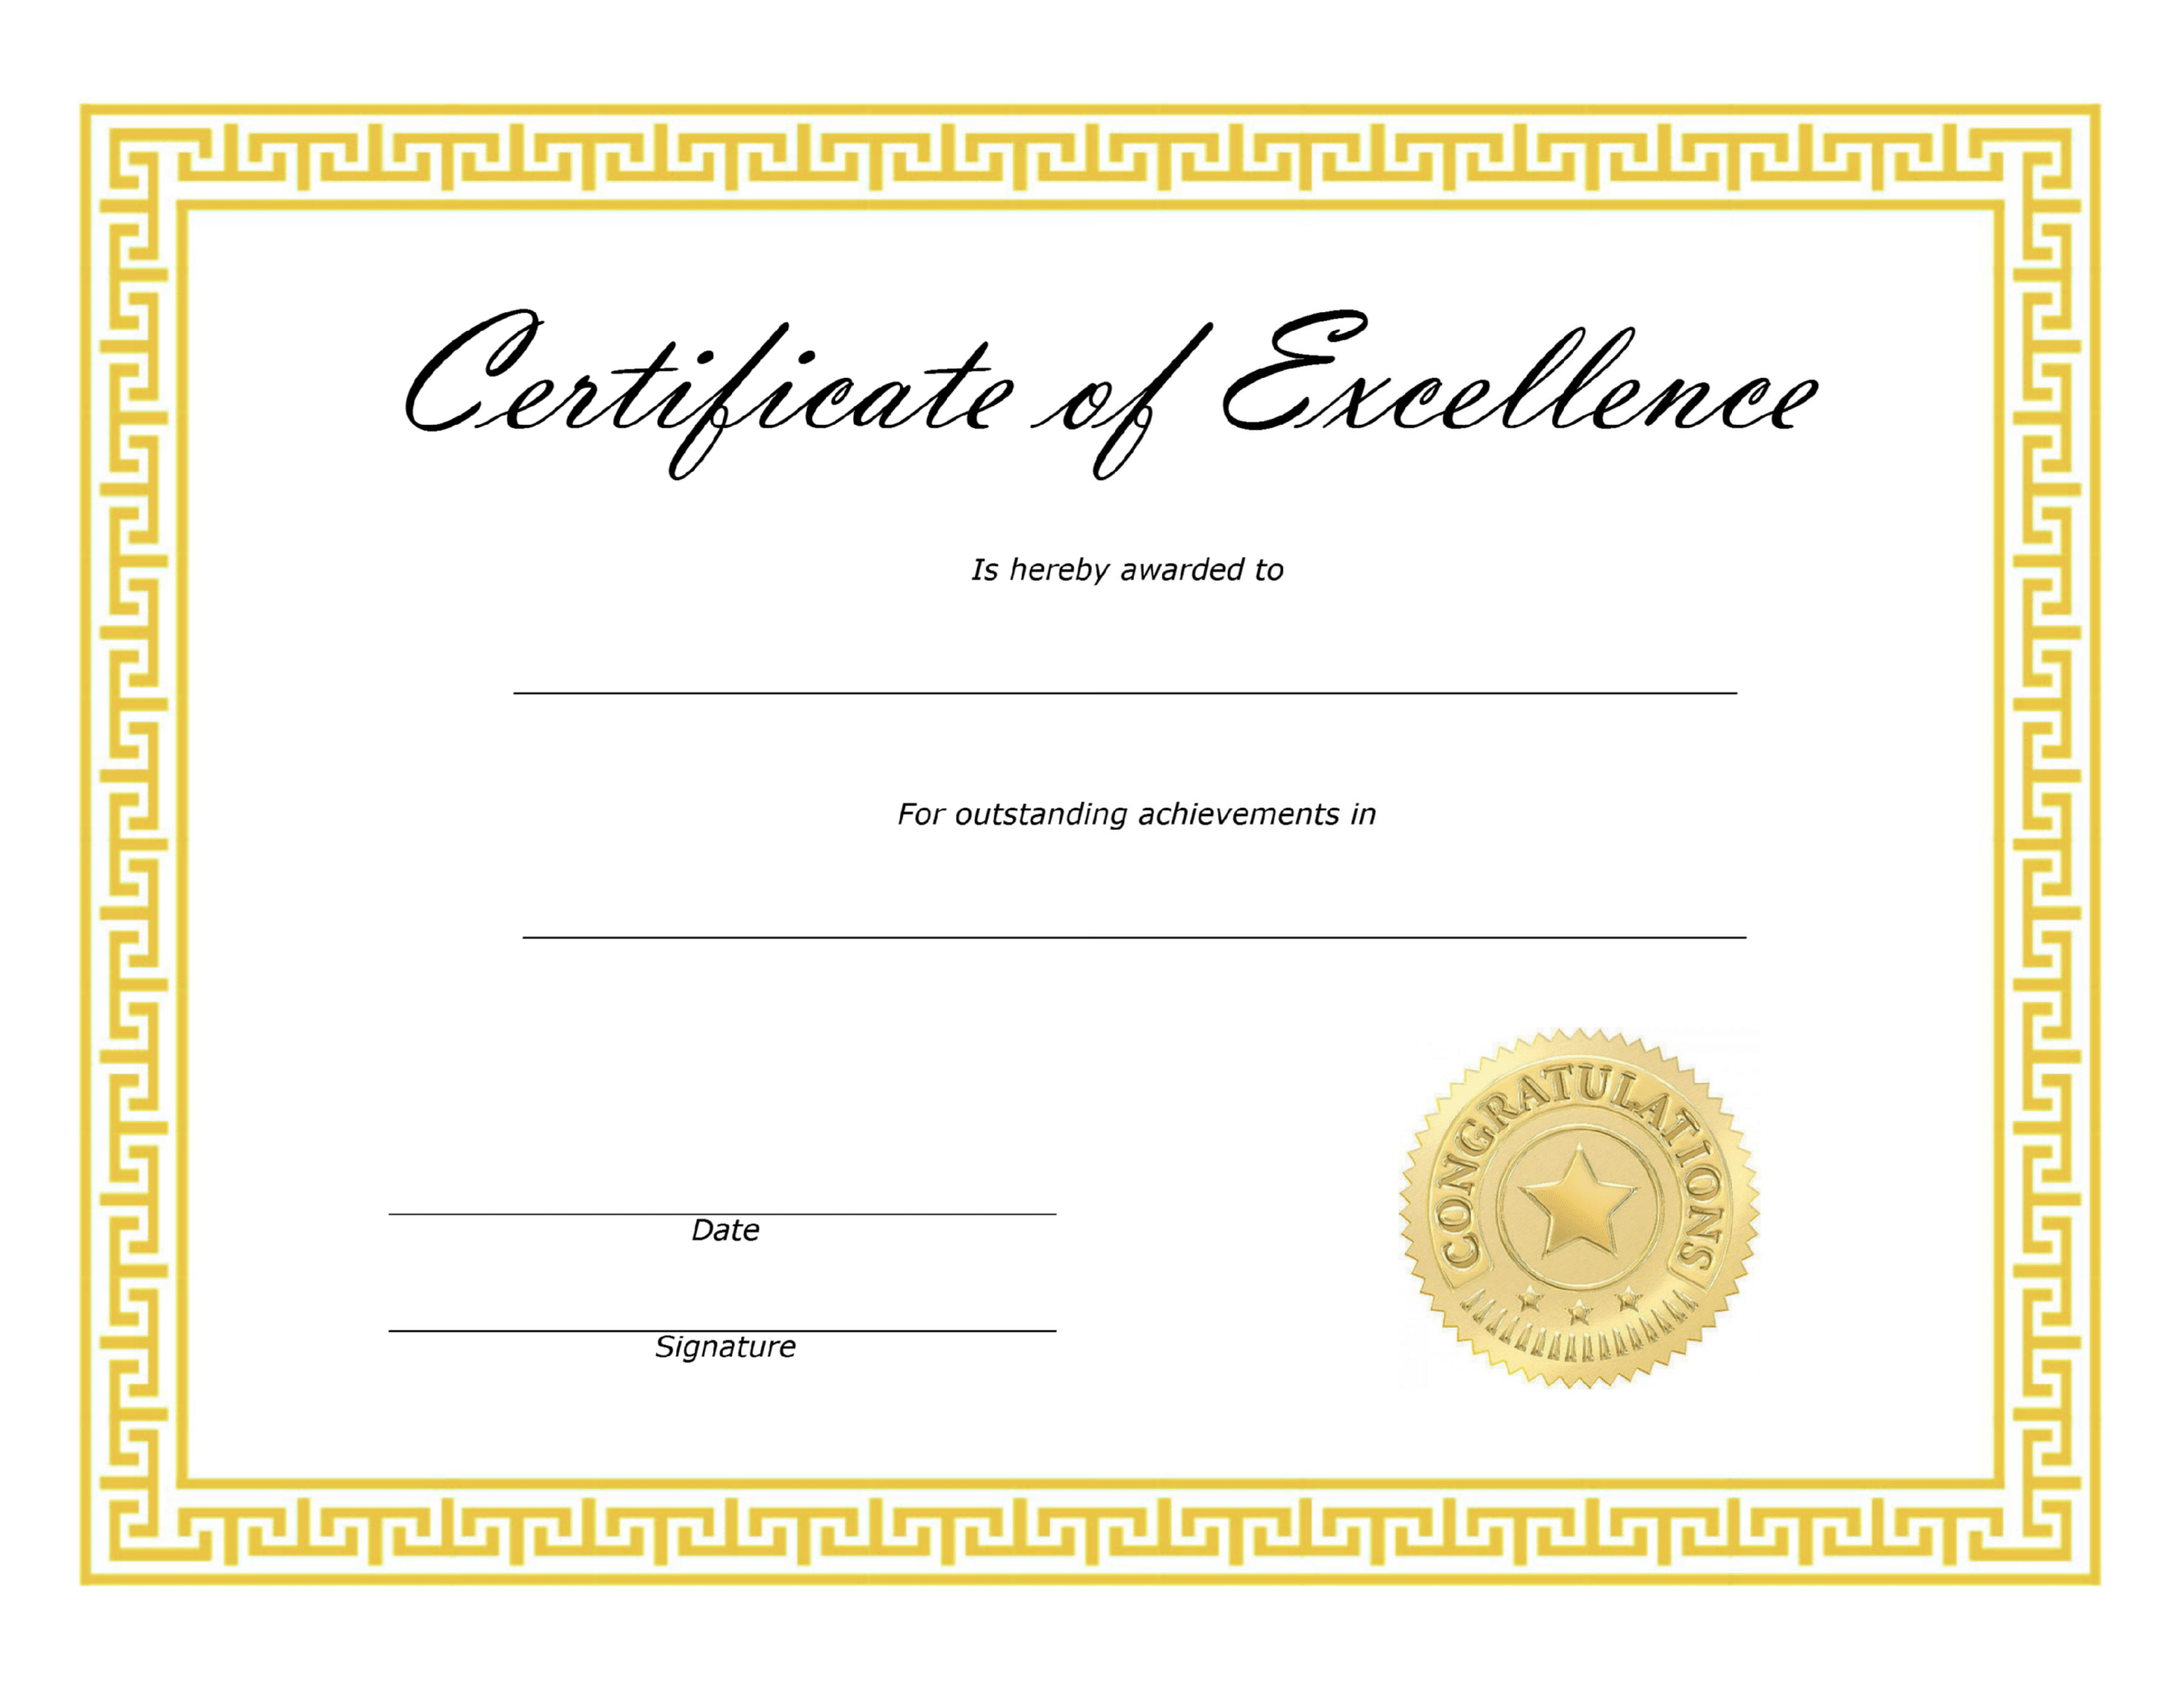 ❤️ Free Sample Certificate Of Excellence Templates❤️ Inside Award Of Excellence Certificate Template